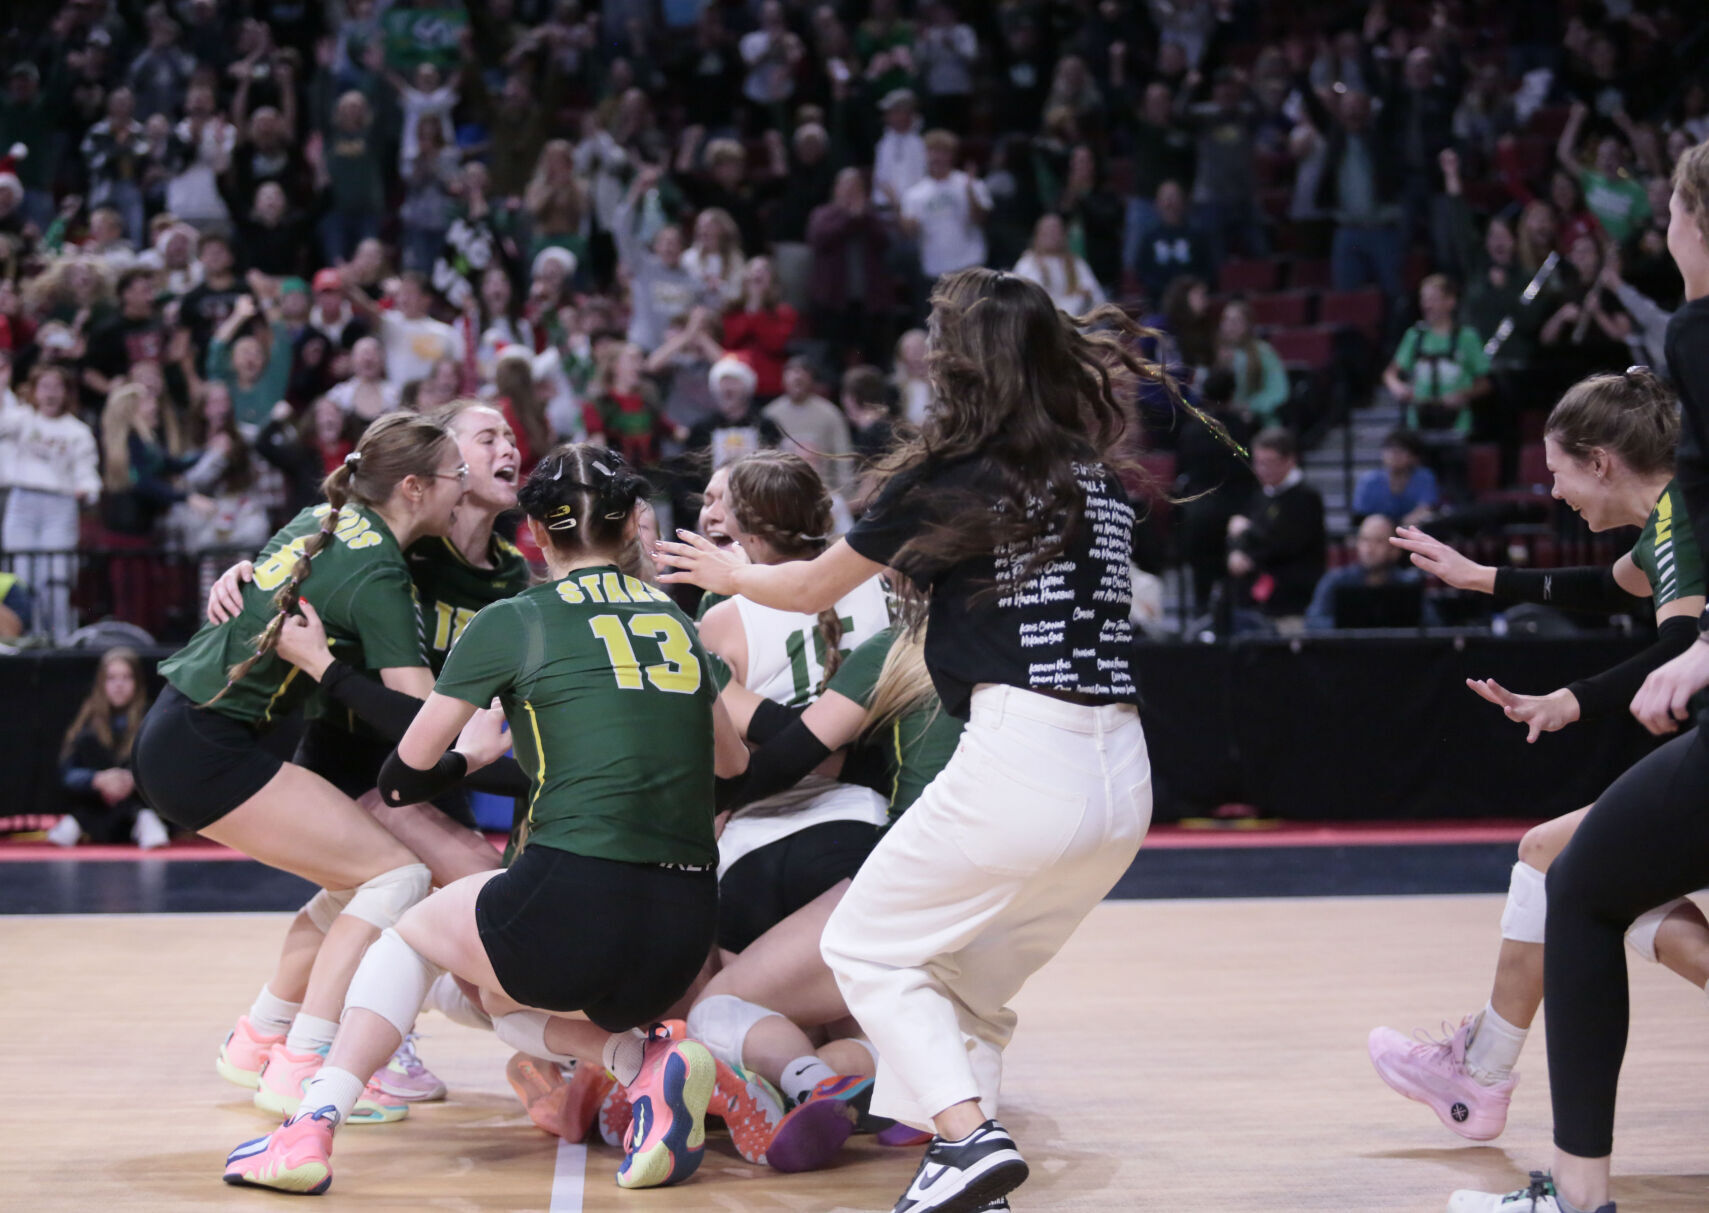 Kearney Catholic volleyball team stages dramatic comeback against Pierce